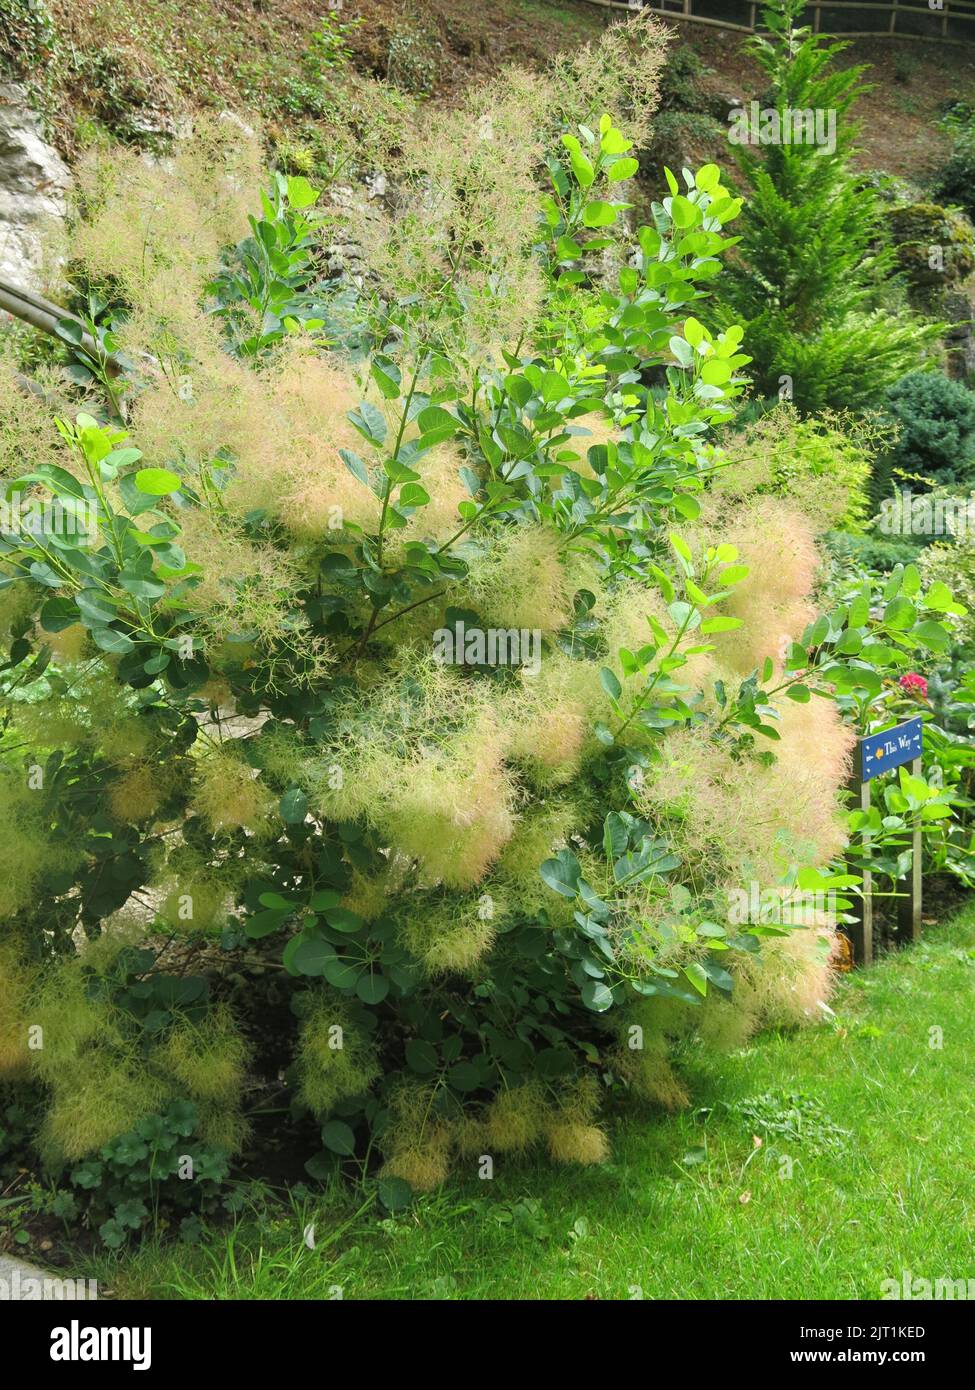 With its characteristic cloudy haze of flowering panicles, the cotinus plant is commonly known as smoke bush or smoketree making an attractive shrub. Stock Photo